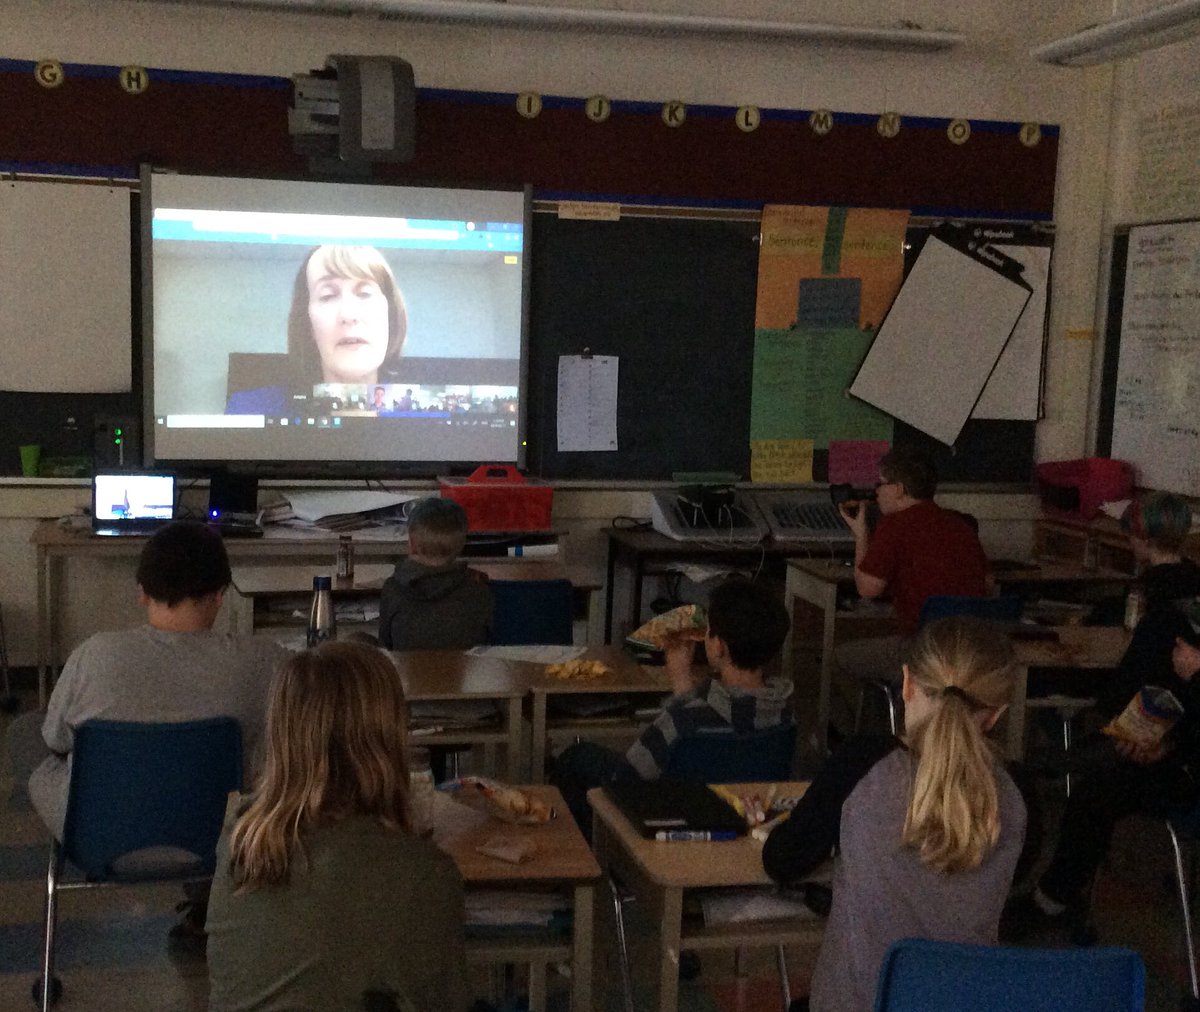 Very informed hangout with the Canada’s Ambassador for Climate Change yesterday! #ExploringByTheSeat #empoweringourfuture  @ebtsoyp @ECCCSciTech @CanAmbClimate